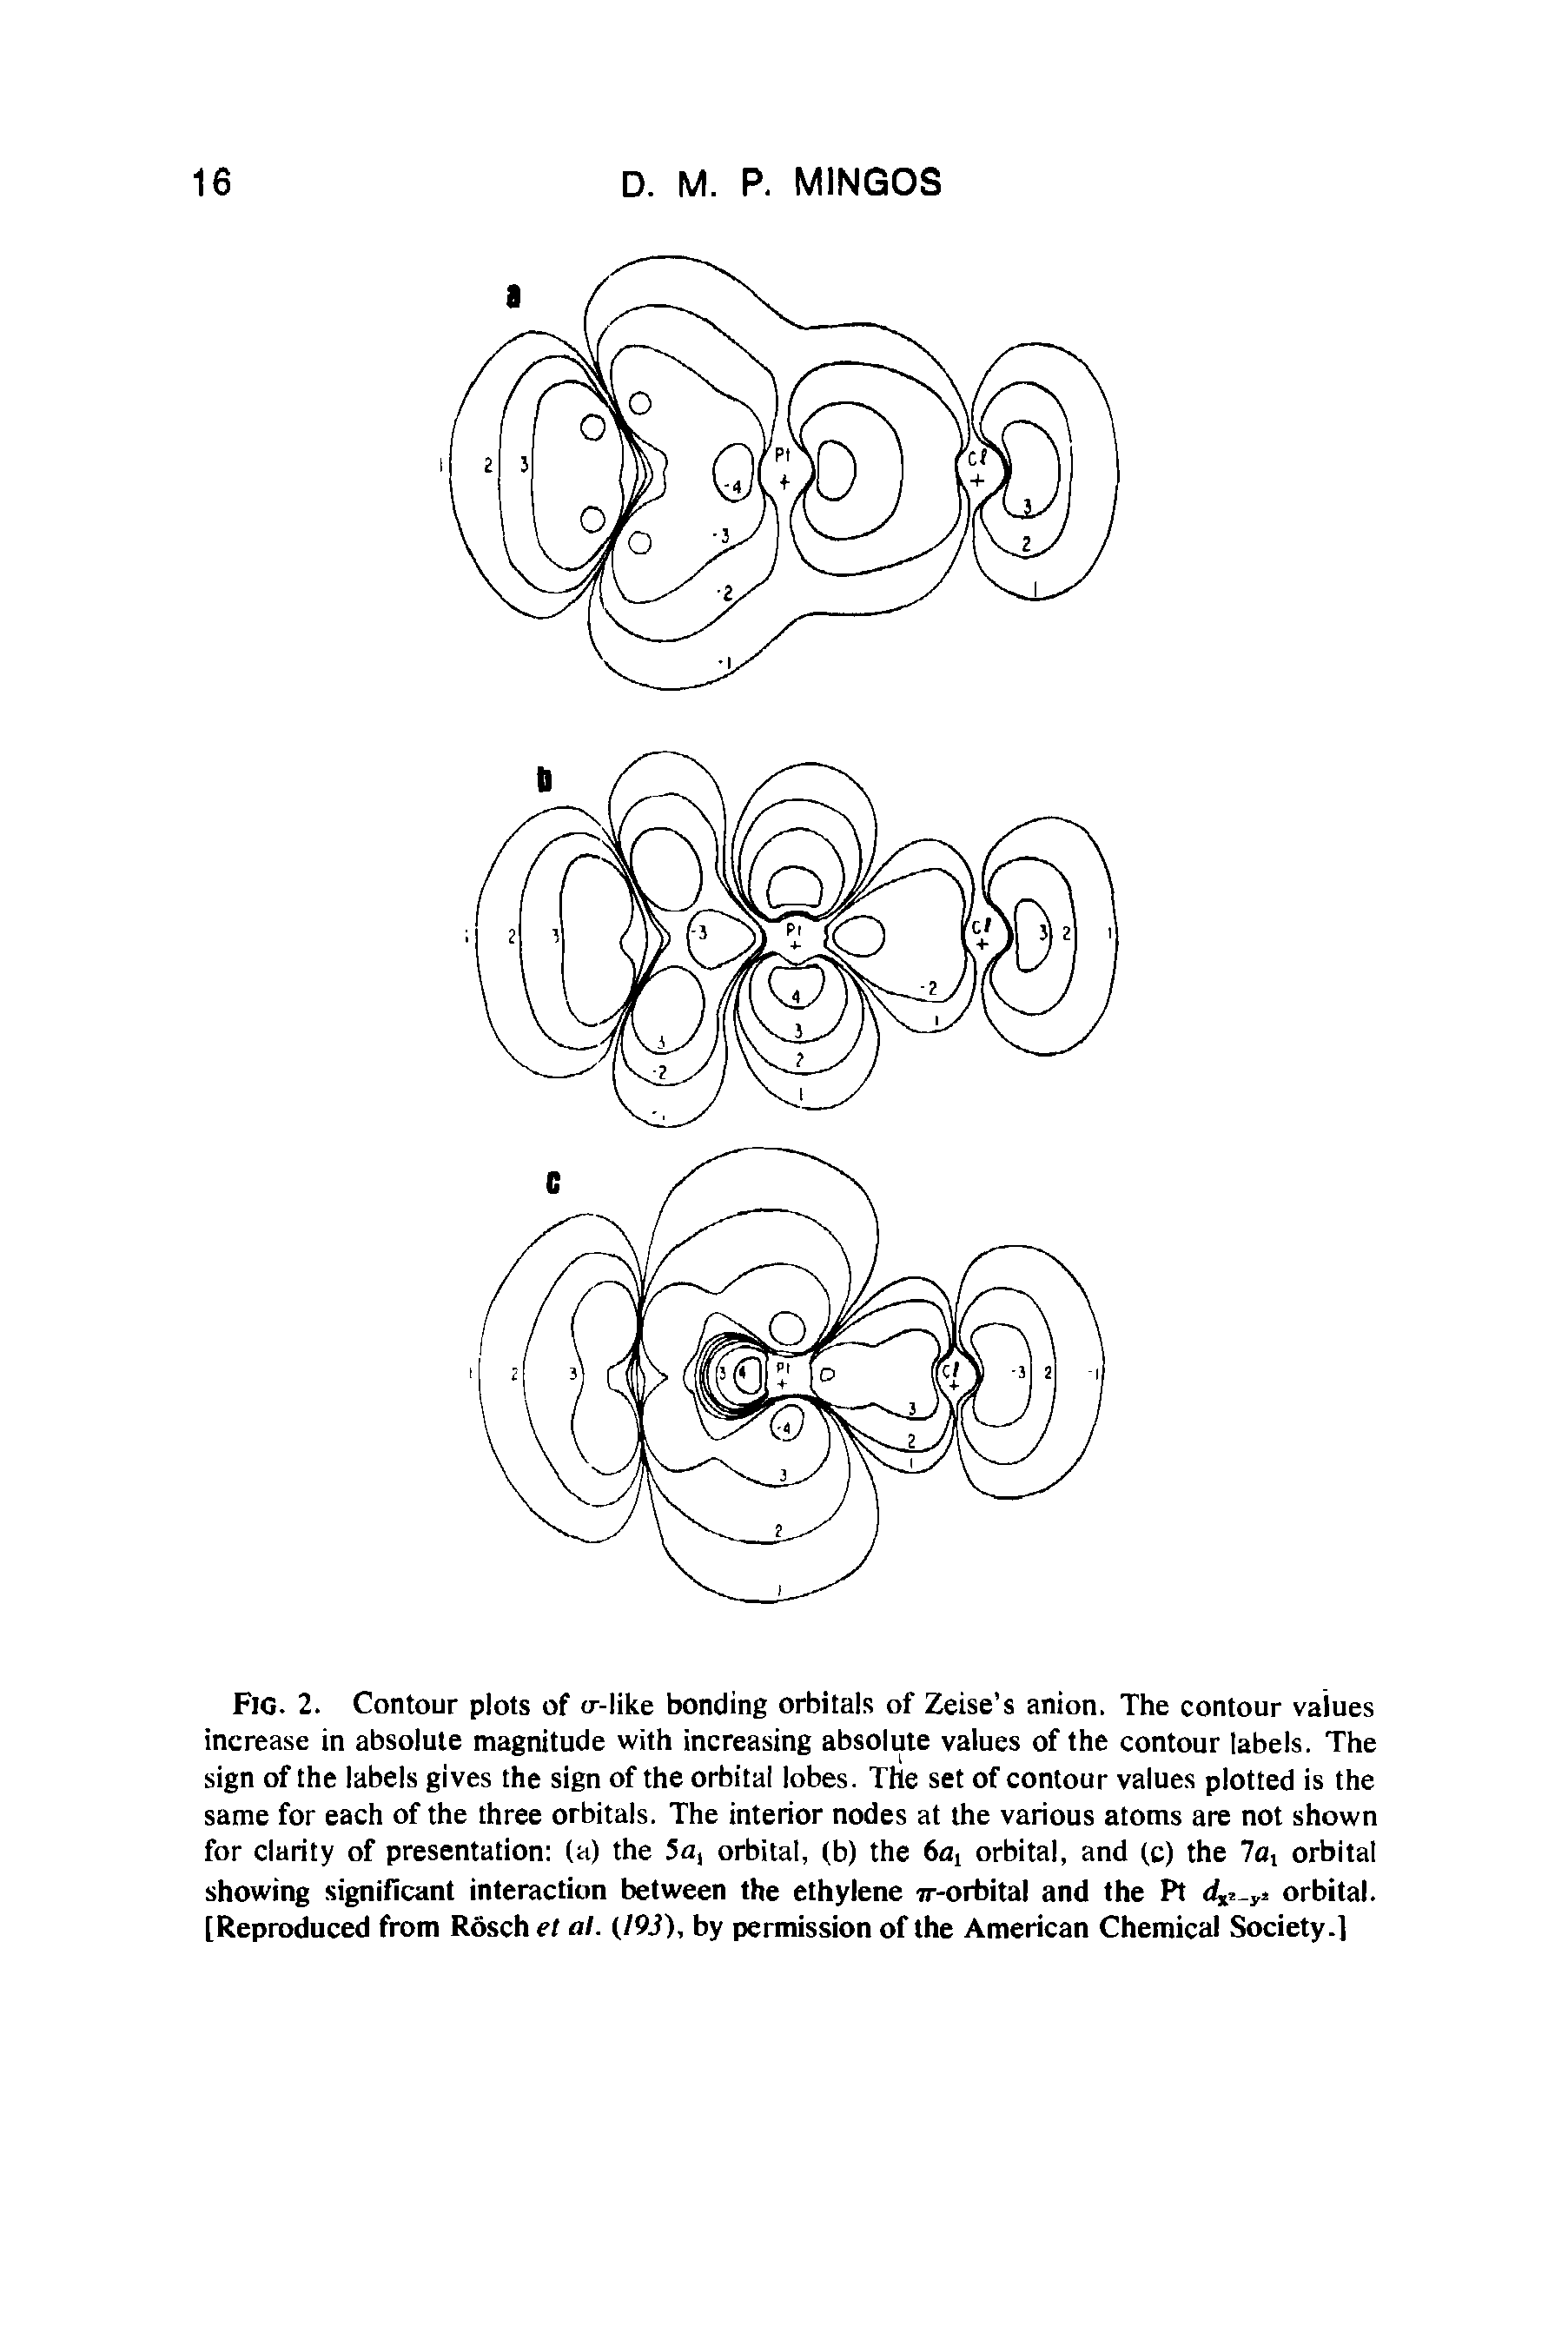 Fig. 2. Contour plots of (Hike bonding orbitals of Zeise s anion. The contour values increase in absolute magnitude with increasing absolute values of the contour labels. The sign of the labels gives the sign of the orbital lobes. The set of contour values plotted is the same for each of the three orbitals. The interior nodes at the various atoms are not shown for clarity of presentation (a) the 5a, orbital, (b) the 6at orbital, and (c) the 7ot orbital showing significant interaction between the ethylene 7r-orbital and the Pt dx, yi orbital. [Reproduced from Rosch et at. (193), by permission of the American Chemical Society.]...